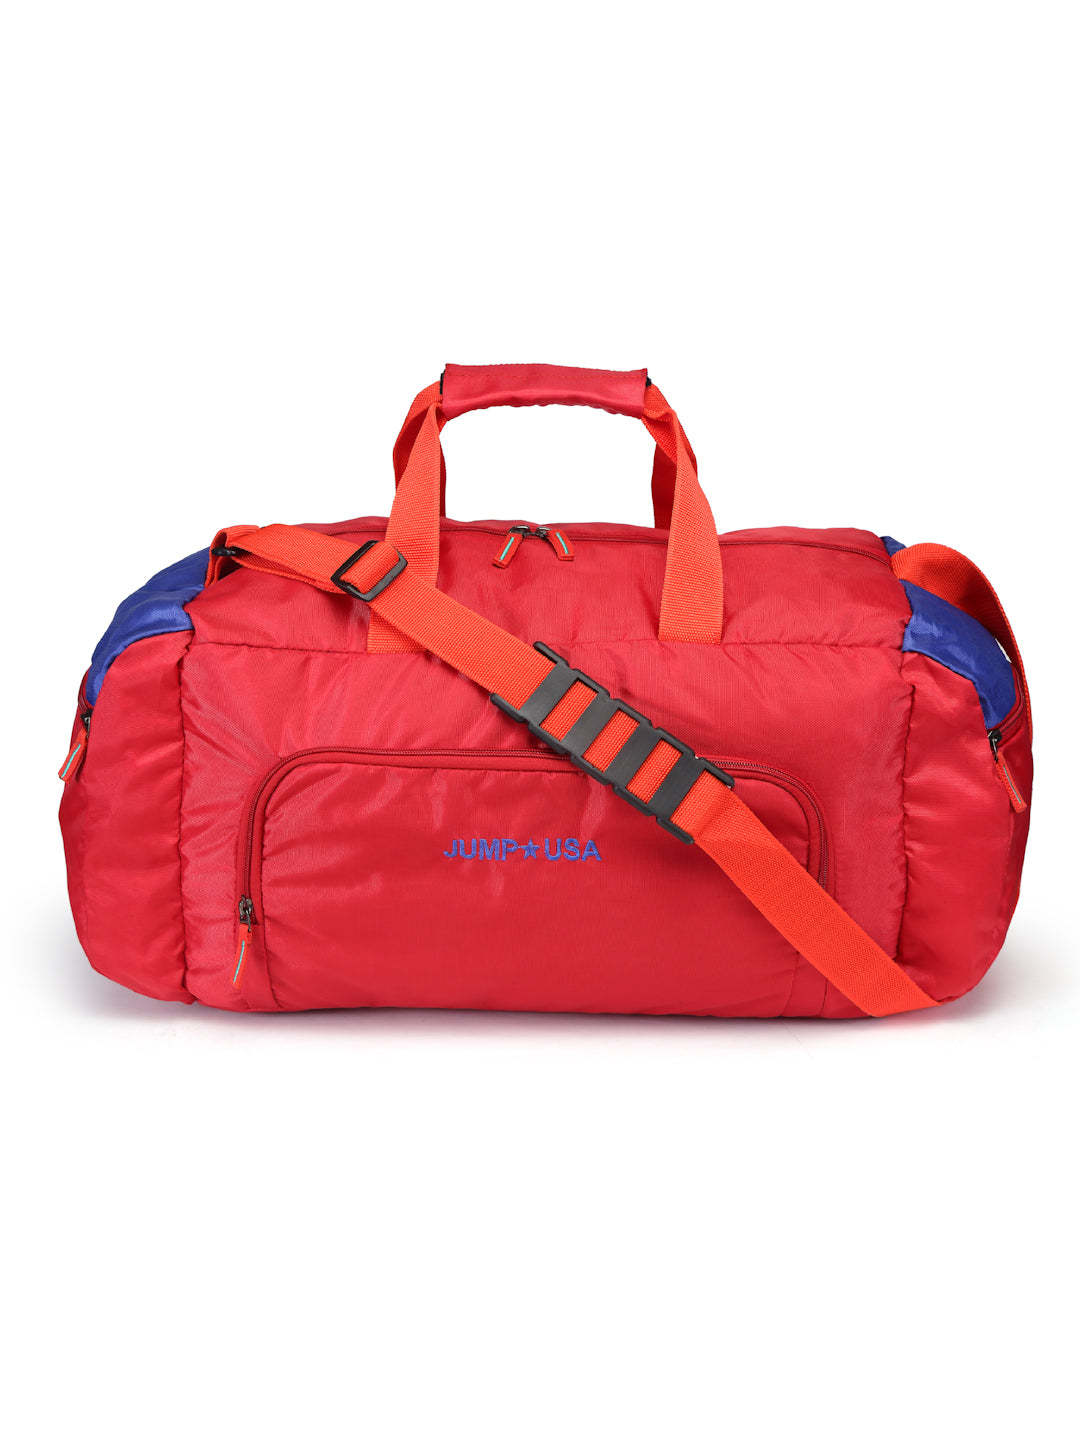 JUMP USA Unisex Red & Royal Blue Solid Hand Duffle Bag